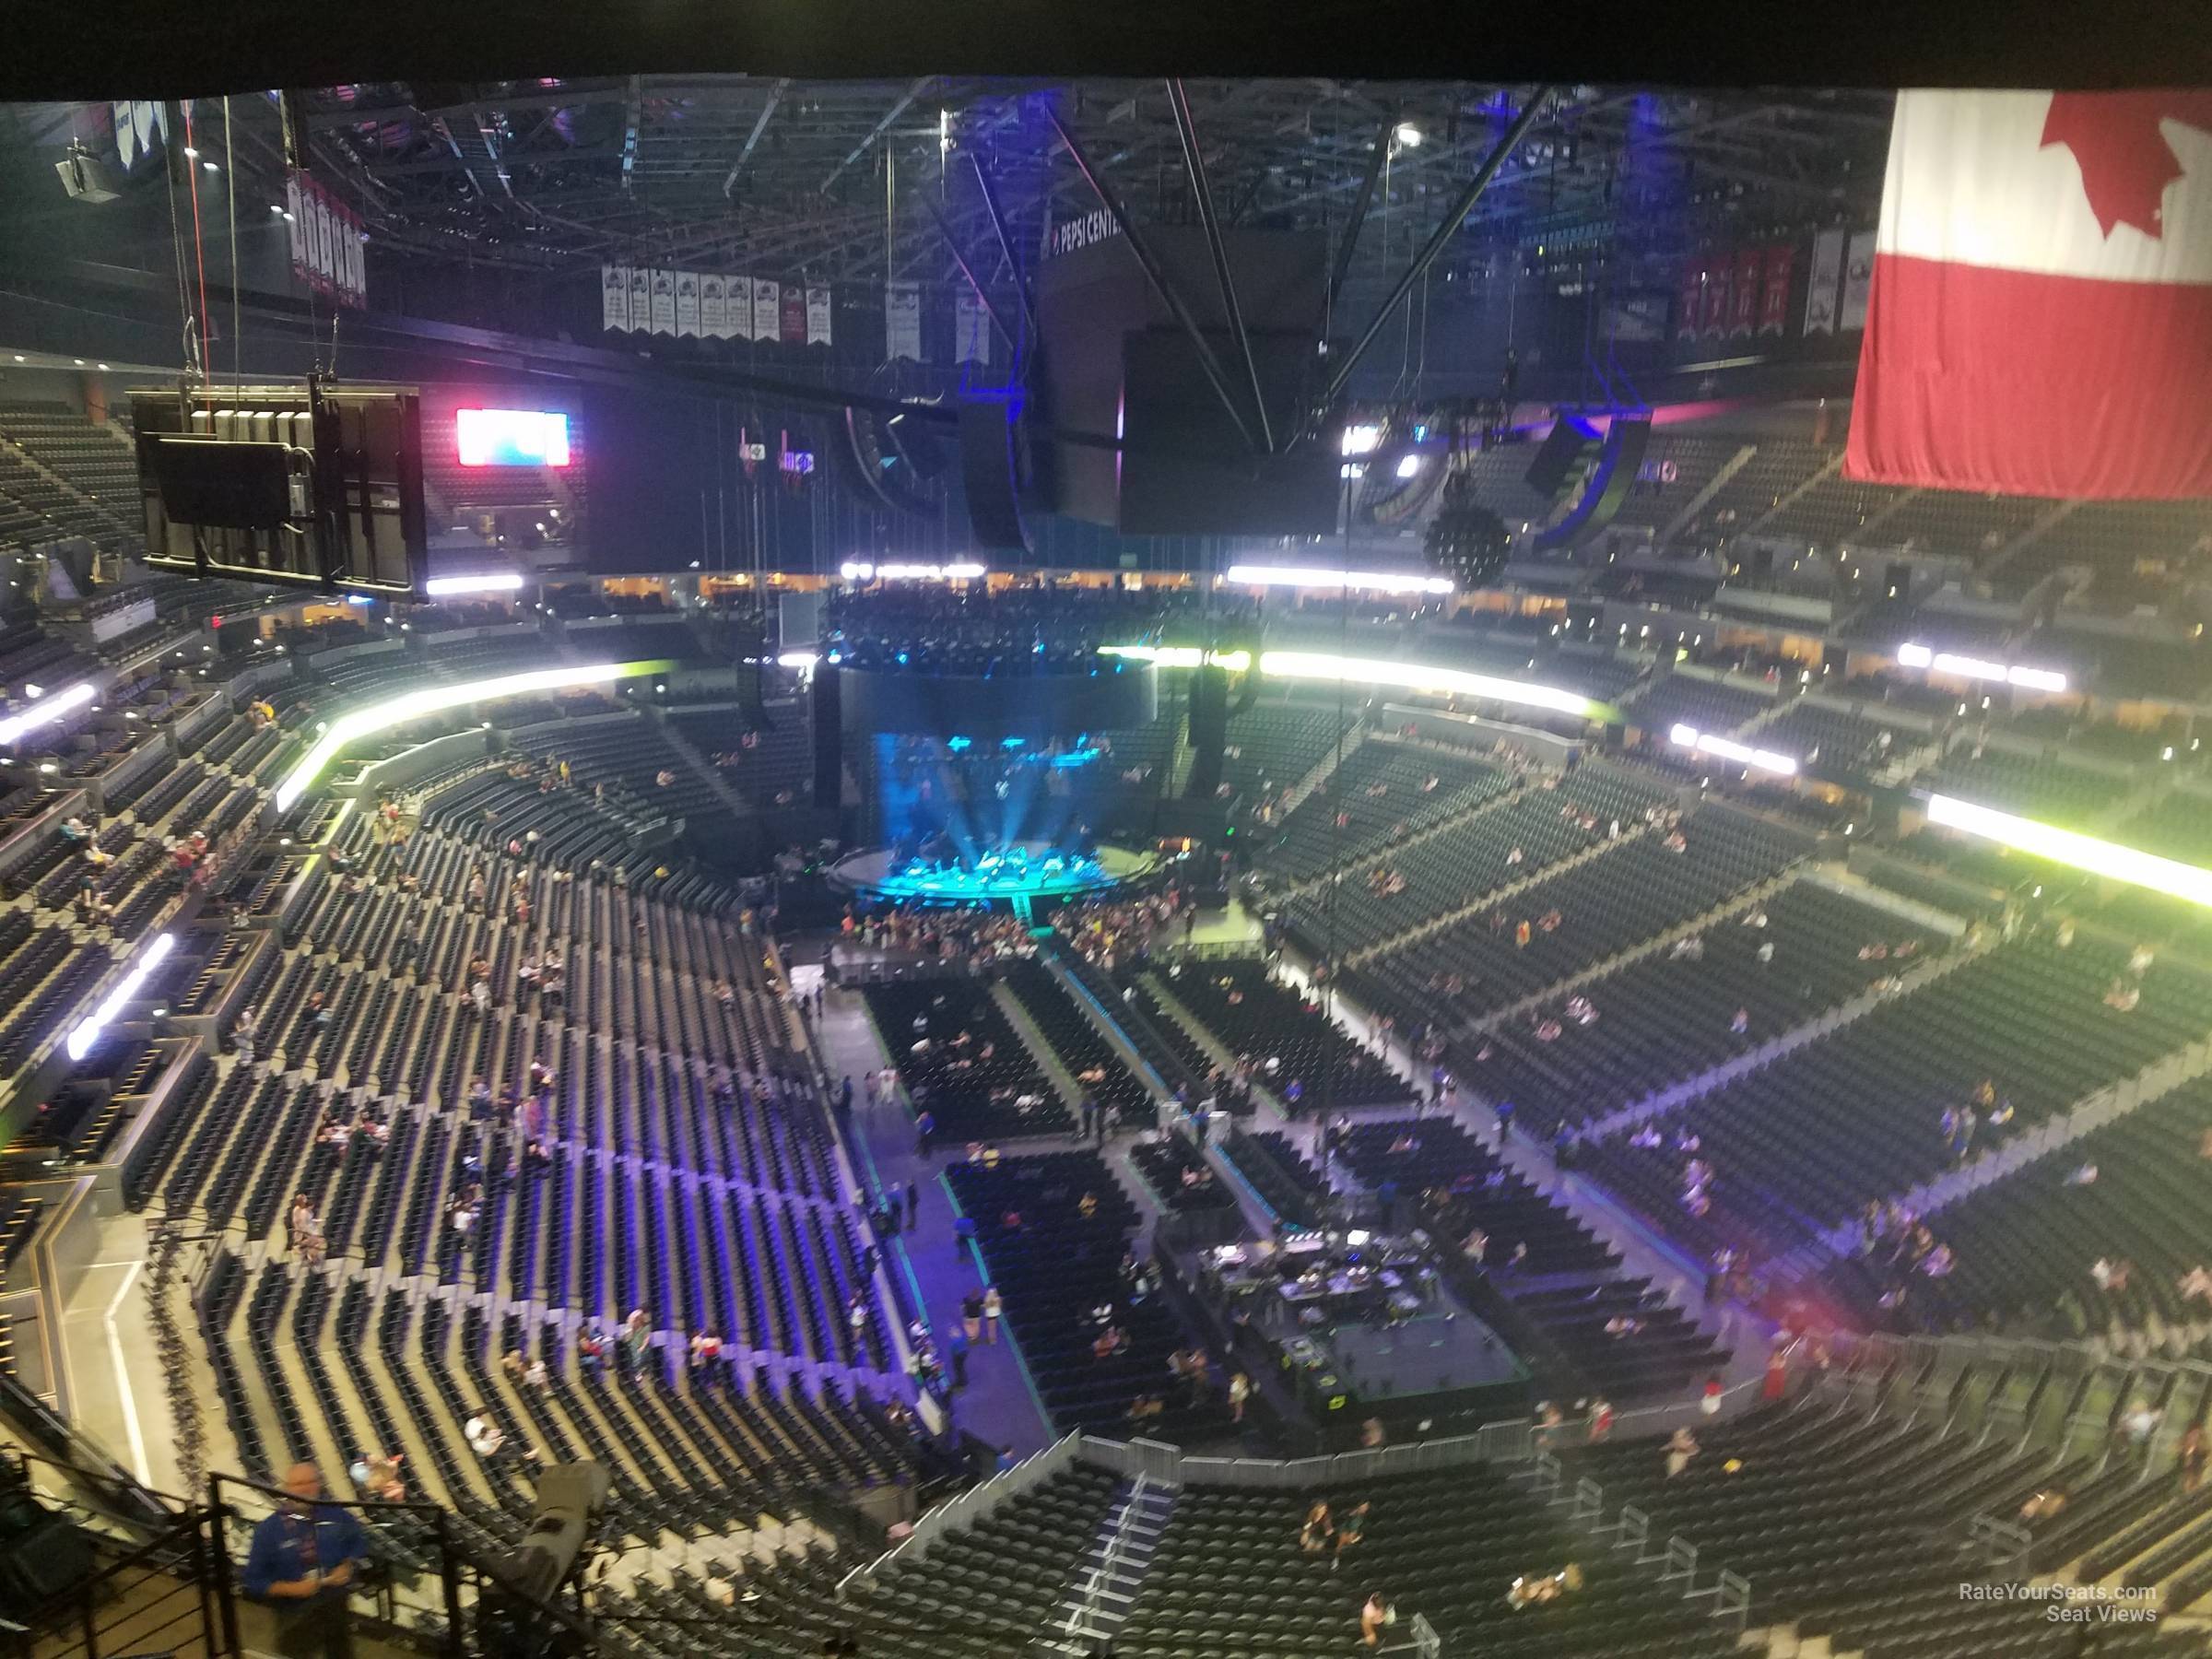 Section 326 at Pepsi Center for Concerts